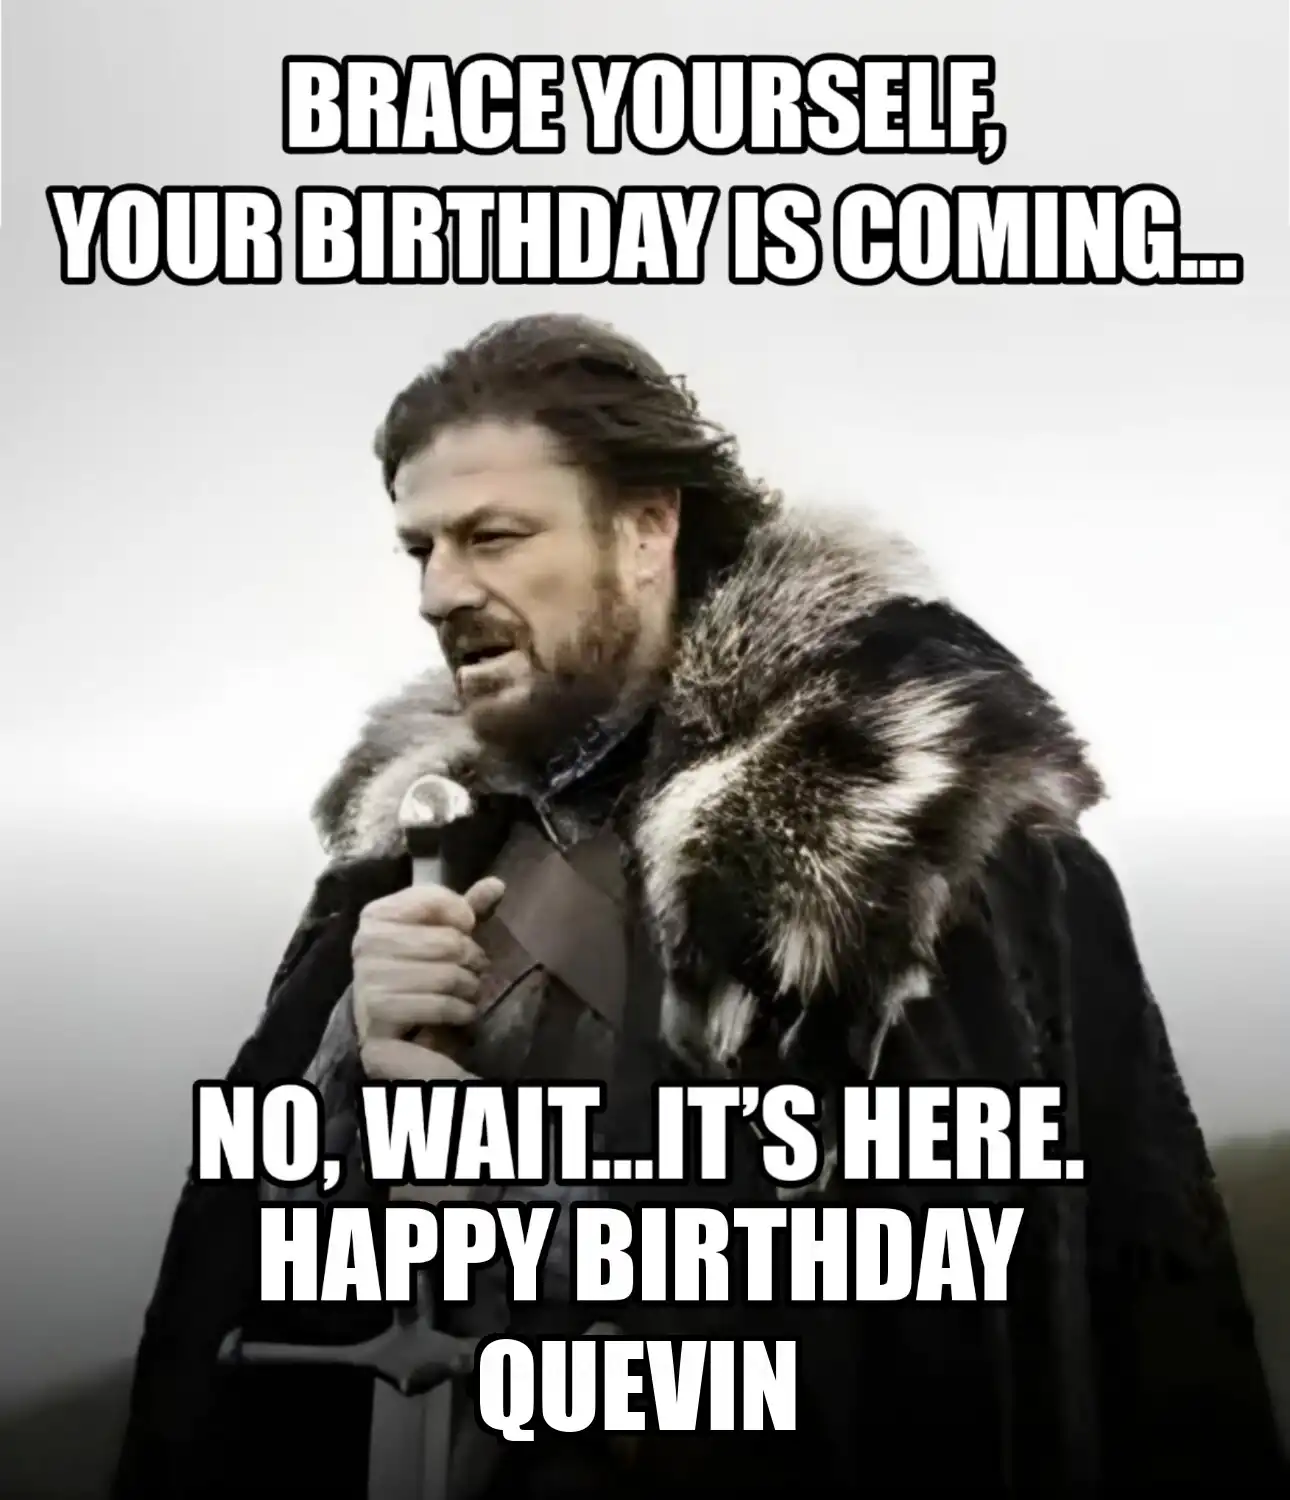 Happy Birthday Quevin Brace Yourself Your Birthday Is Coming Meme